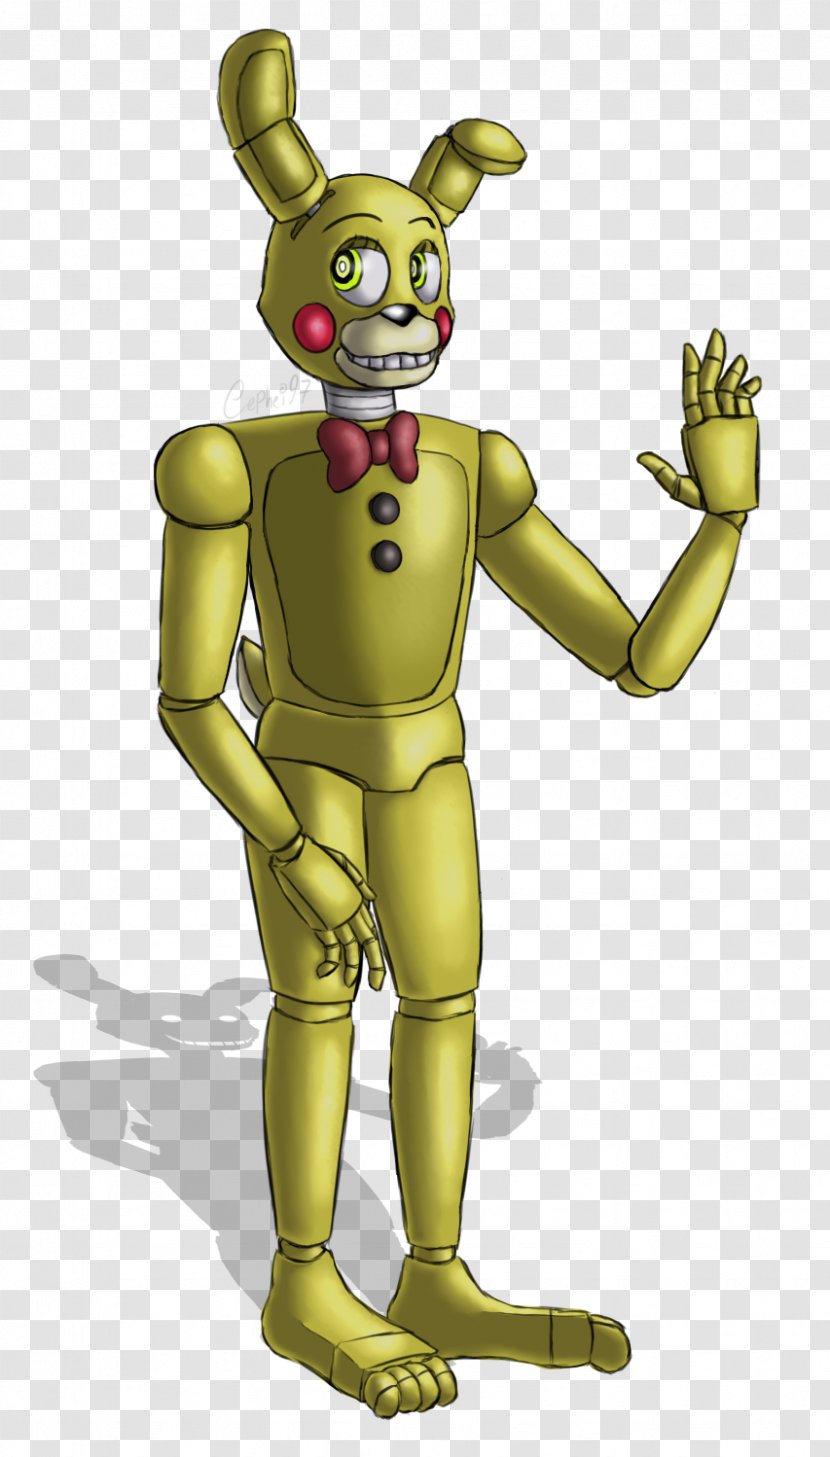 I Bring The Joy Five Nights At Freddy's Finger Cartoon - Flower - Watercolor Transparent PNG